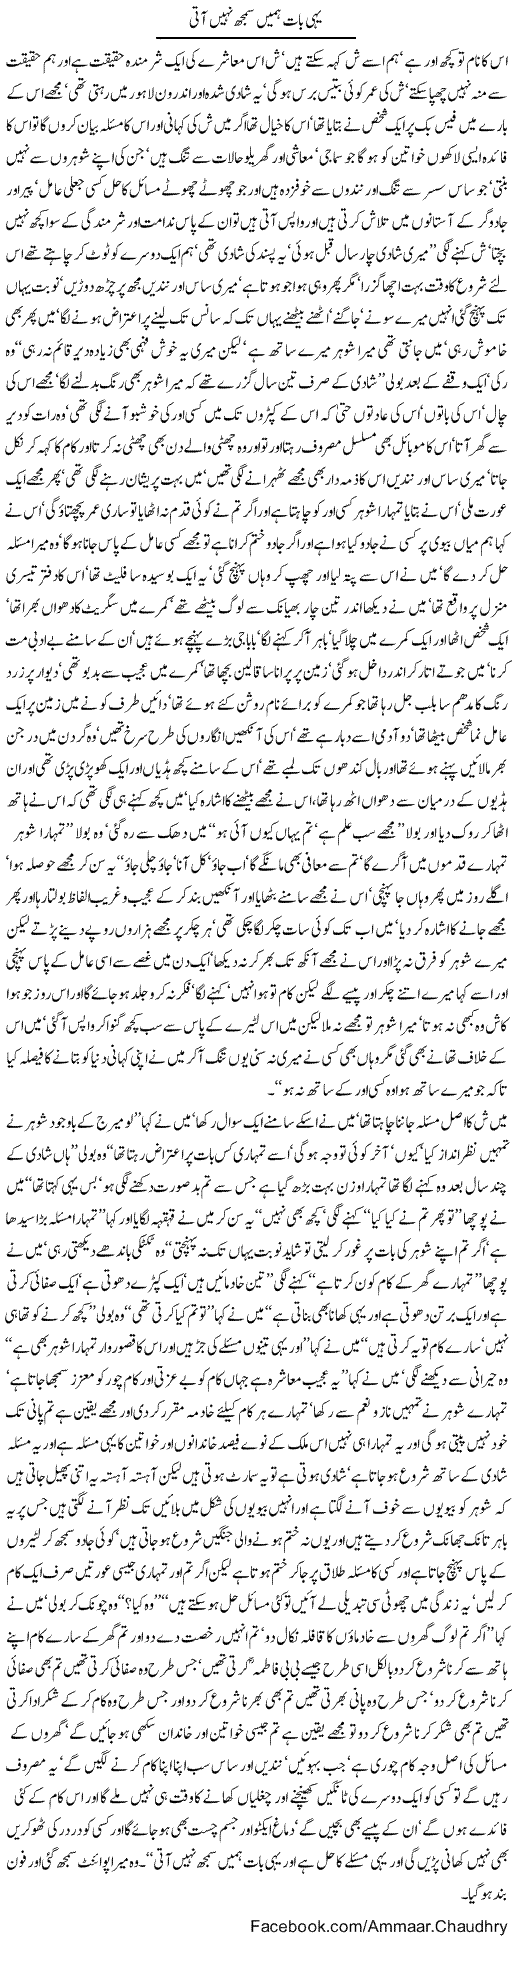 Women and Her Husband Express Column Amad Chaudhry 8 January 2012